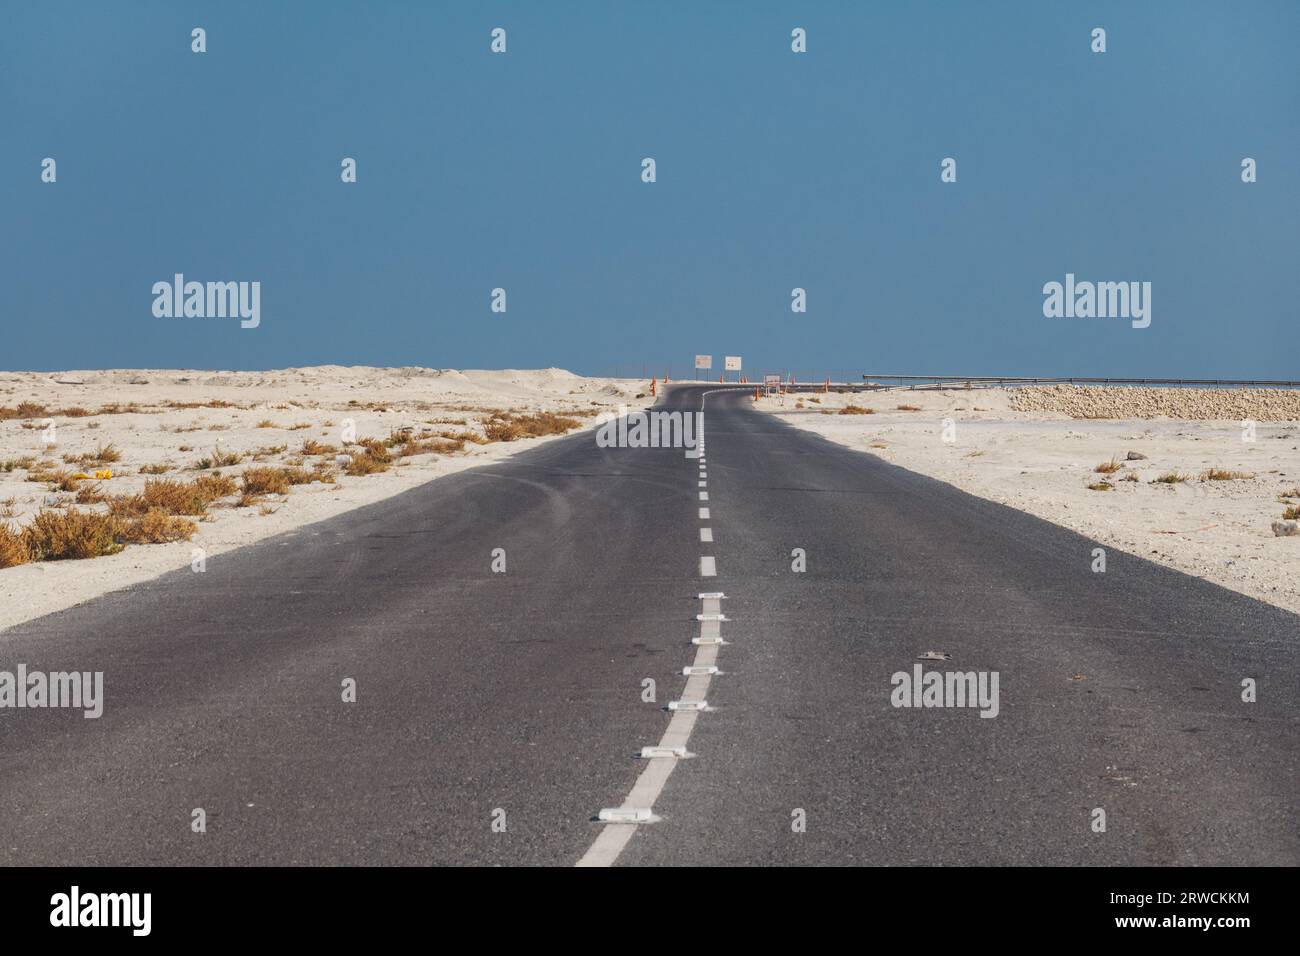 an empty highway spans across the desert in southern Bahrain Stock Photo